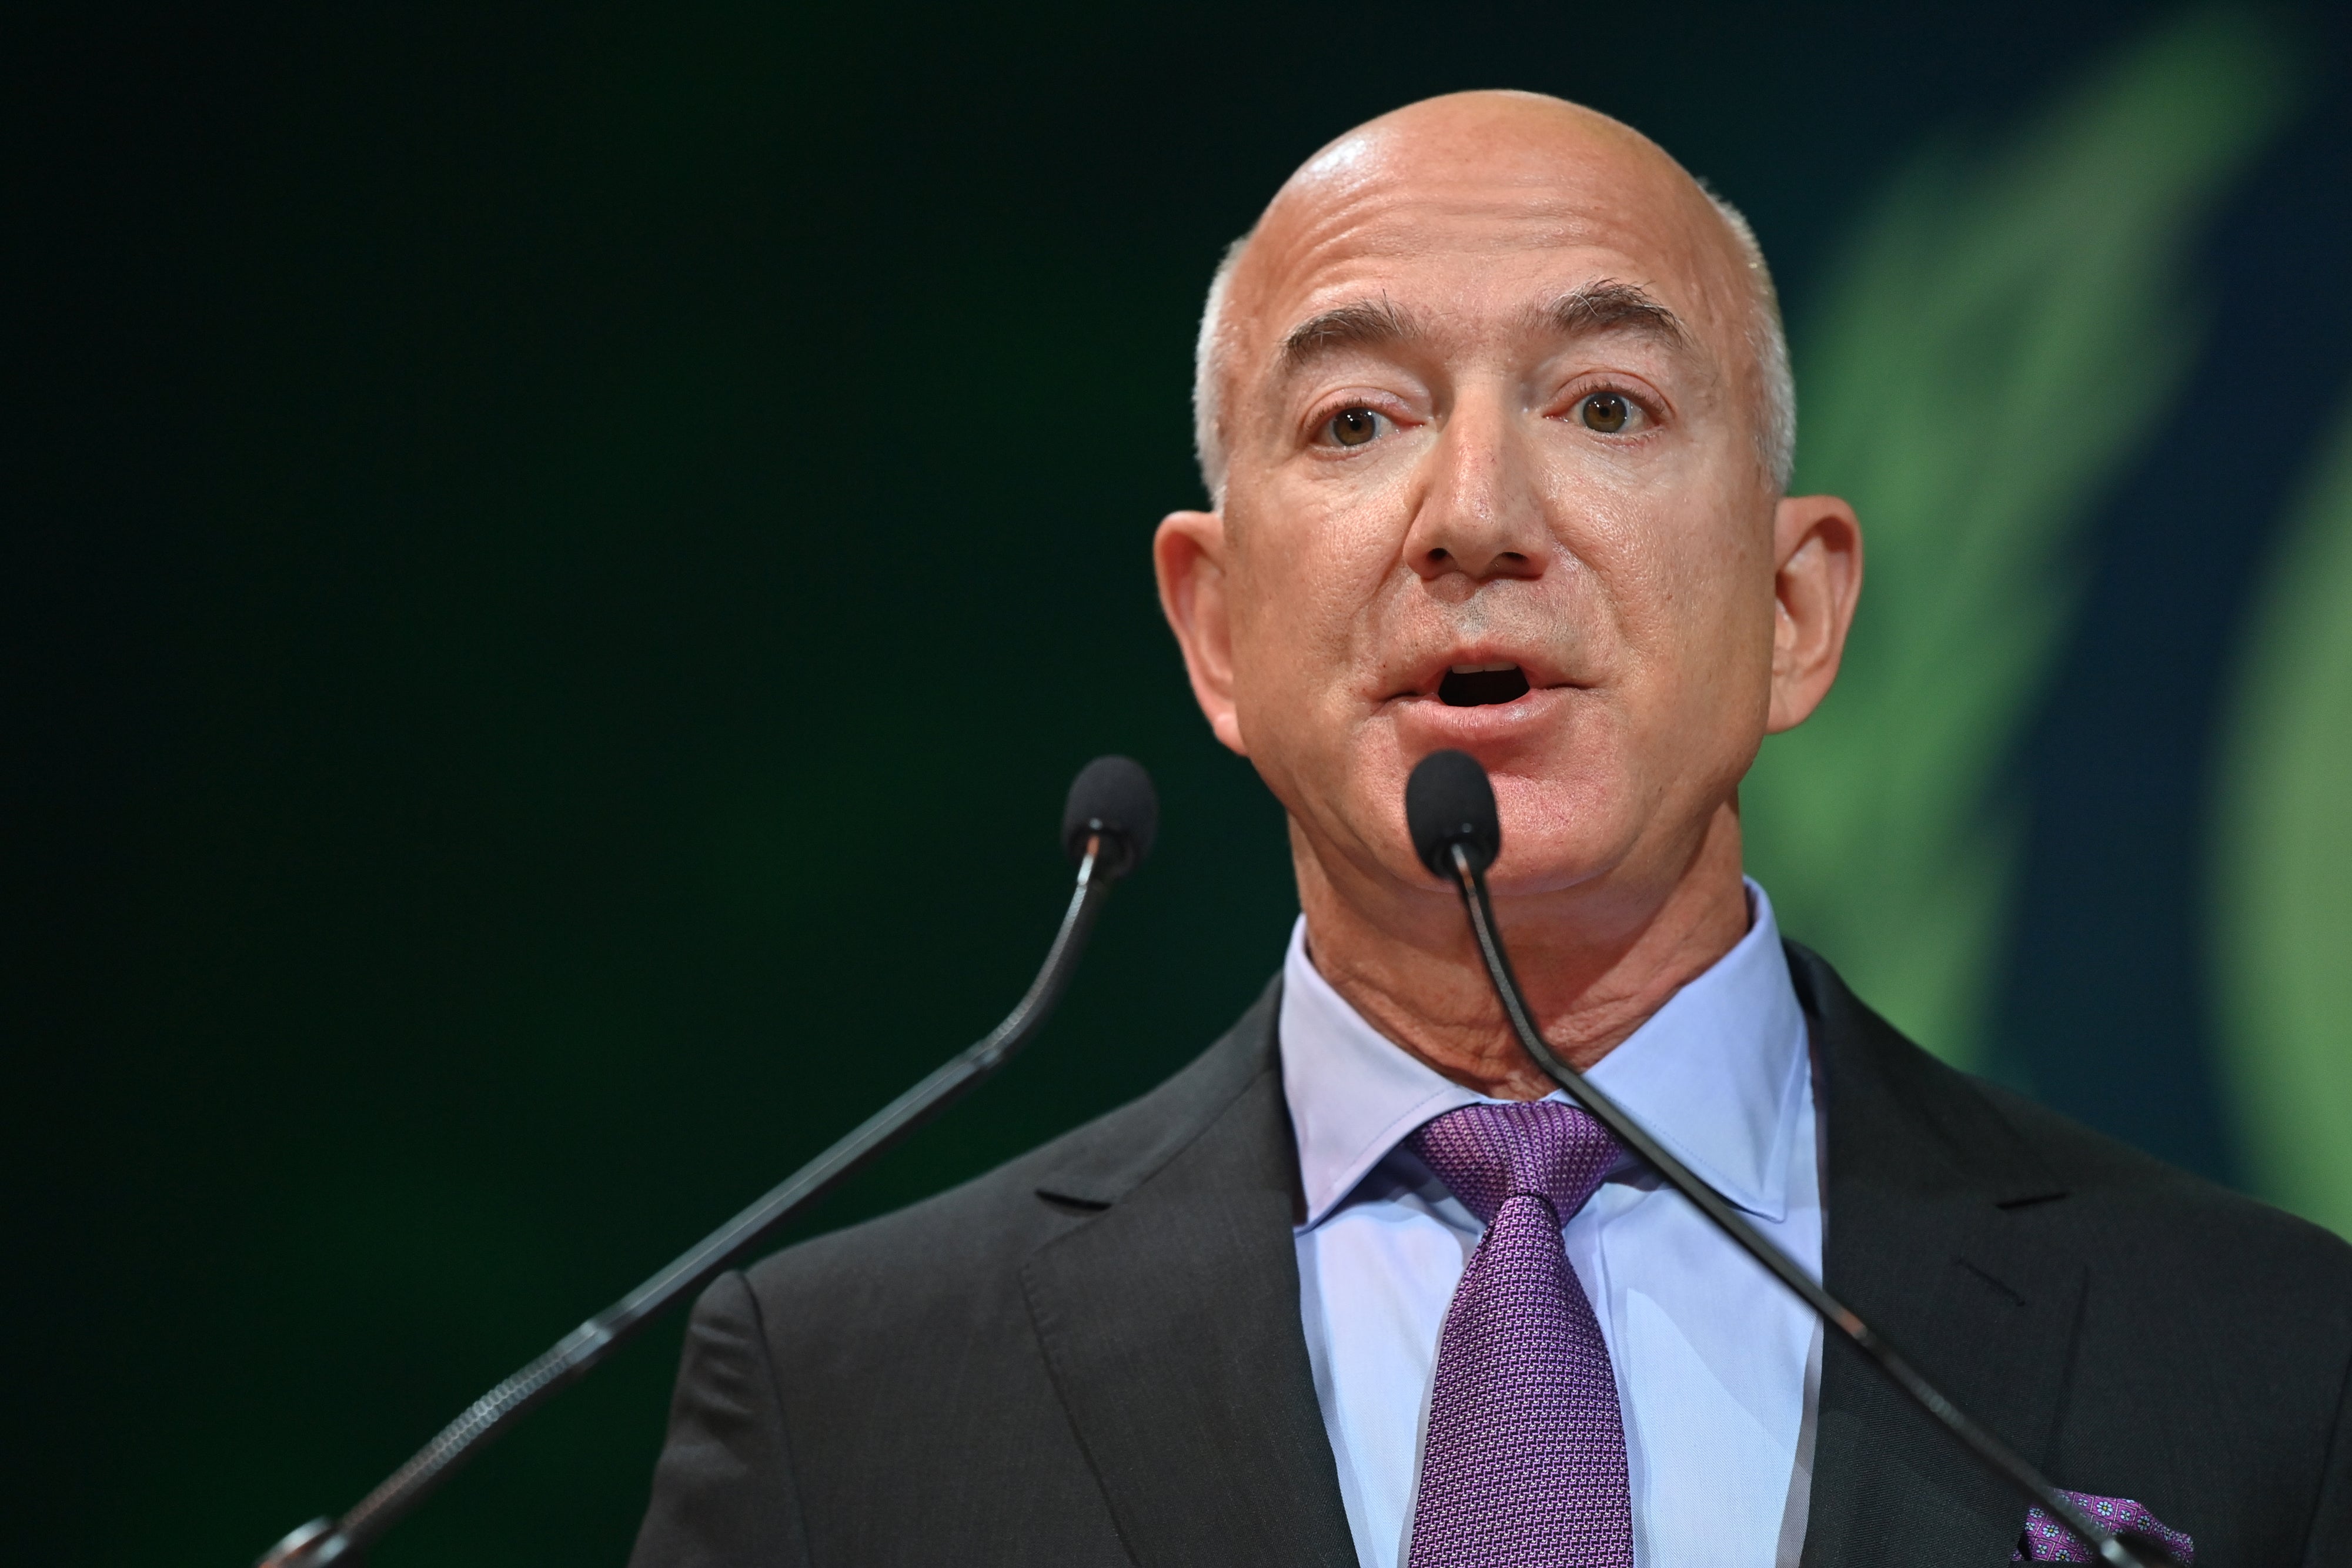 Amazon founder Jeff Bezos stepped down as chief executive in 2021 (Paul Ellis/PA)